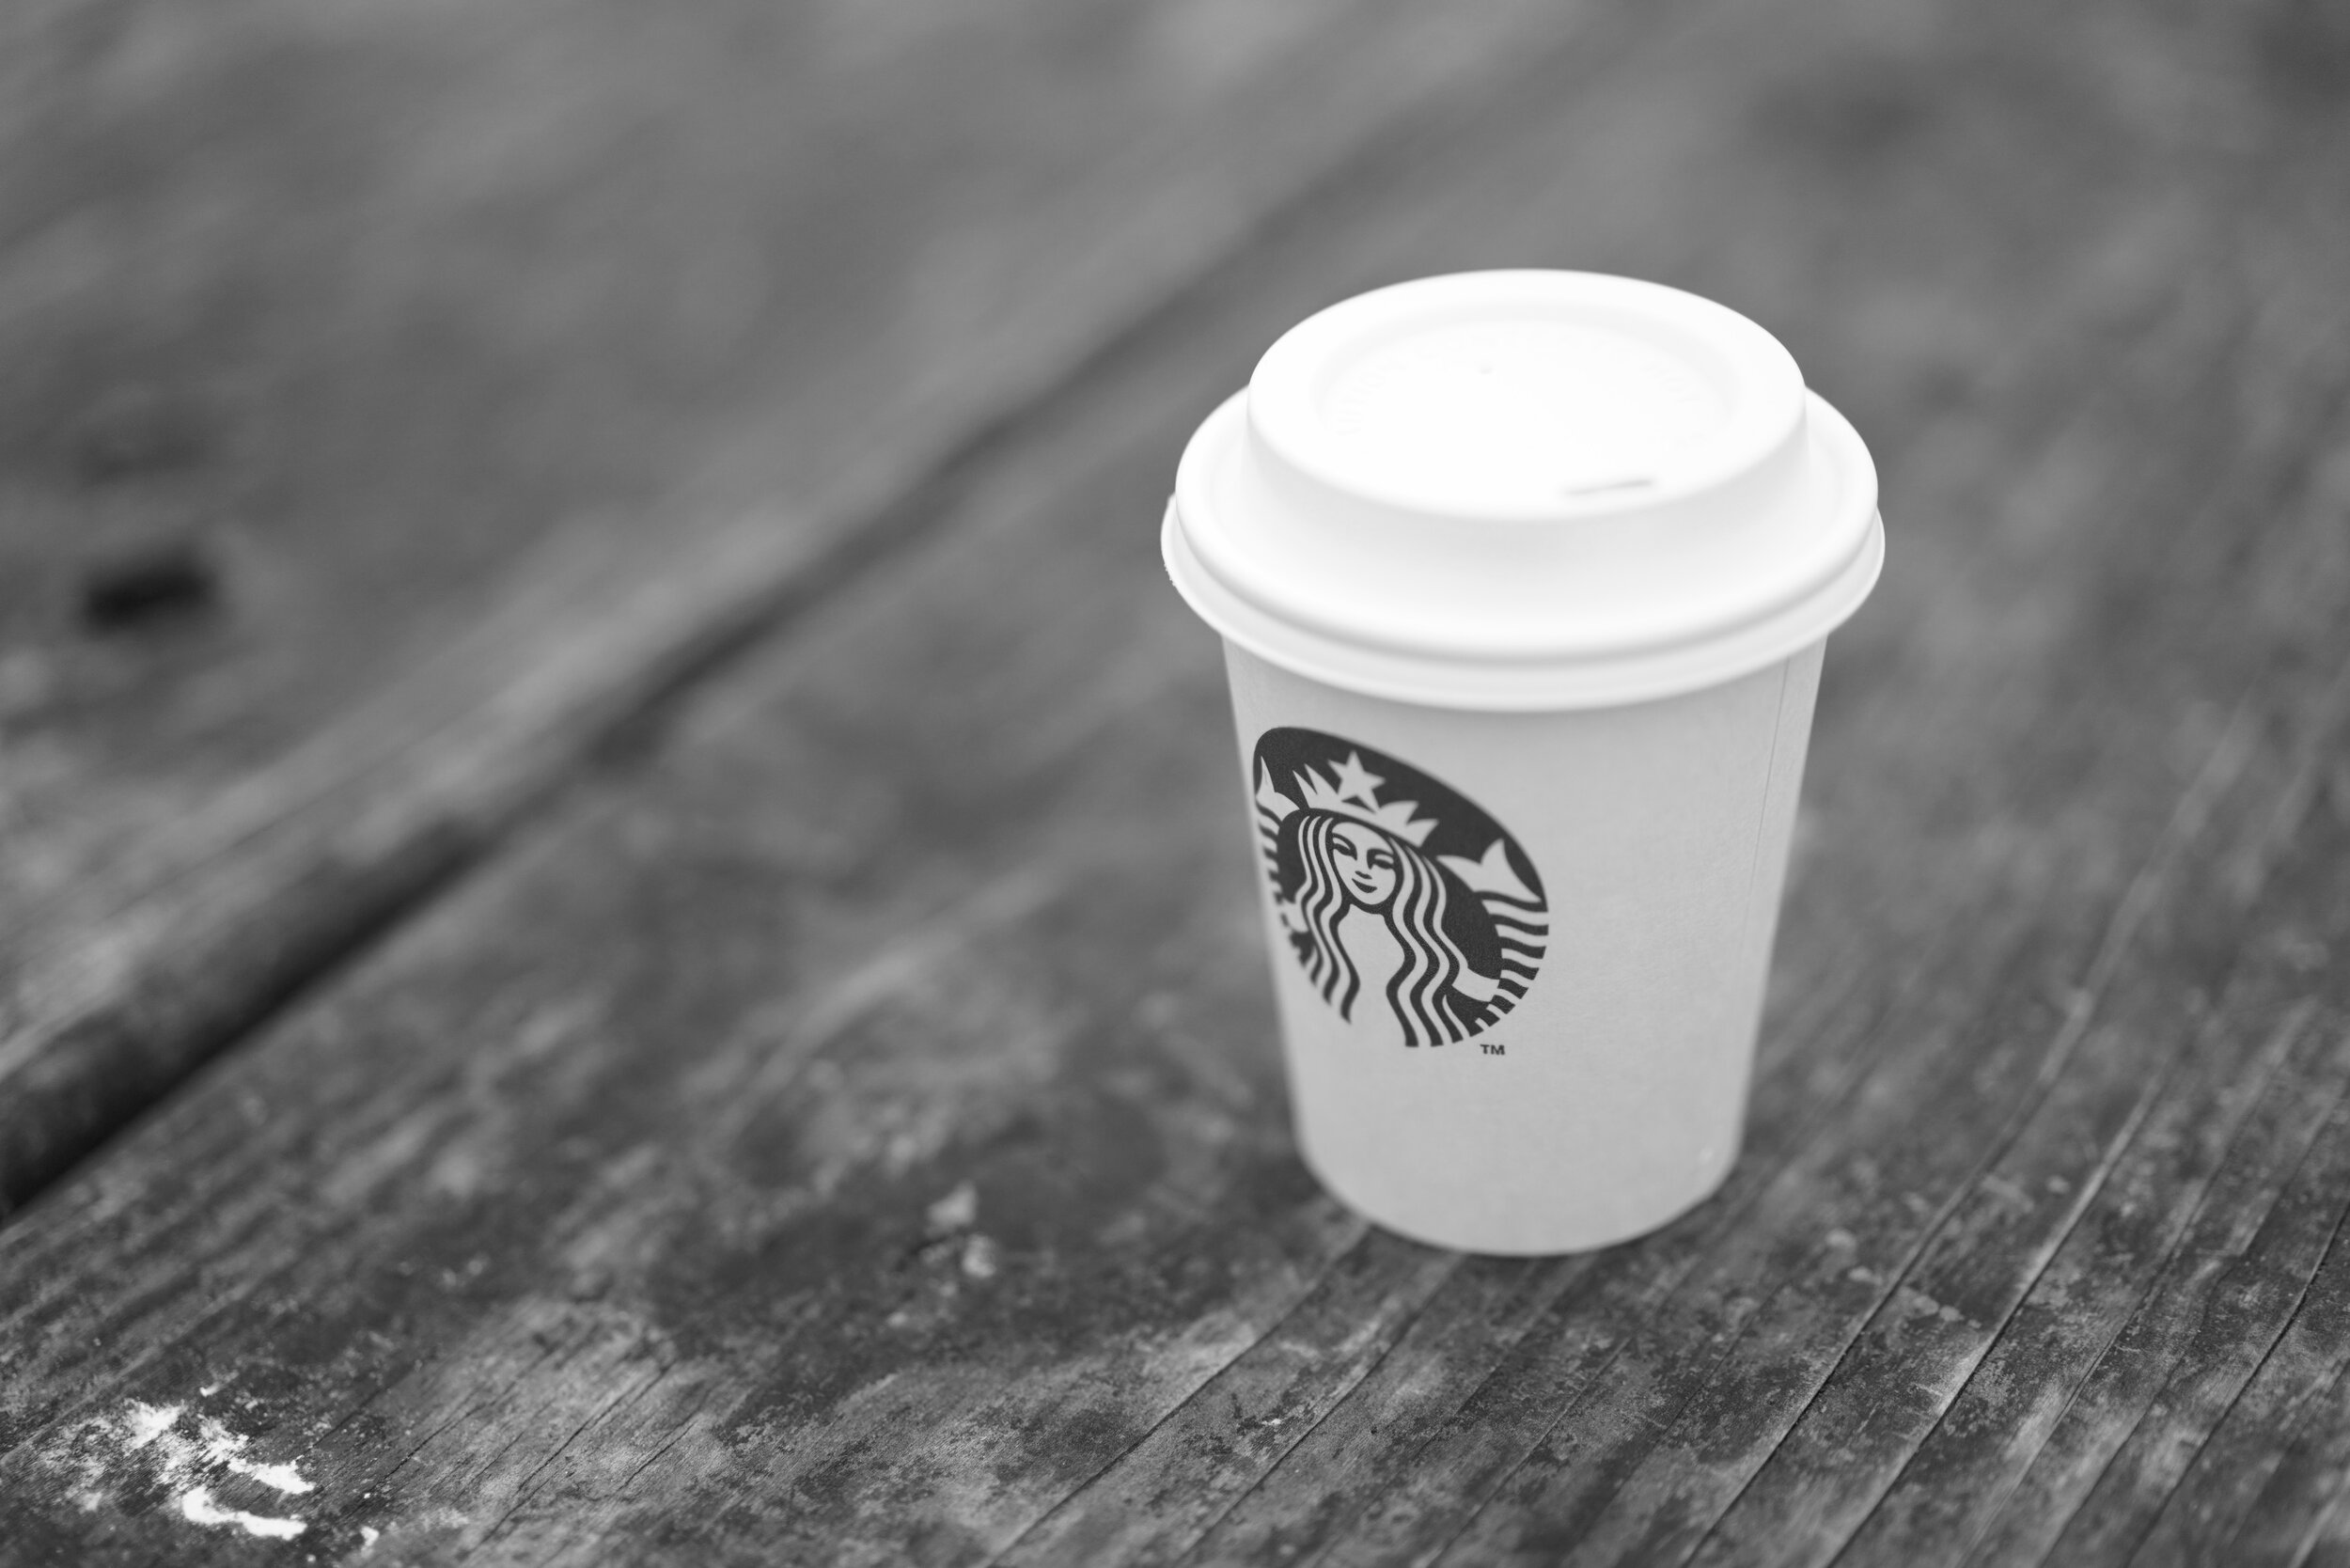 A paper takeaway coffee cup with the Starbucks logo sits on a wooden table.